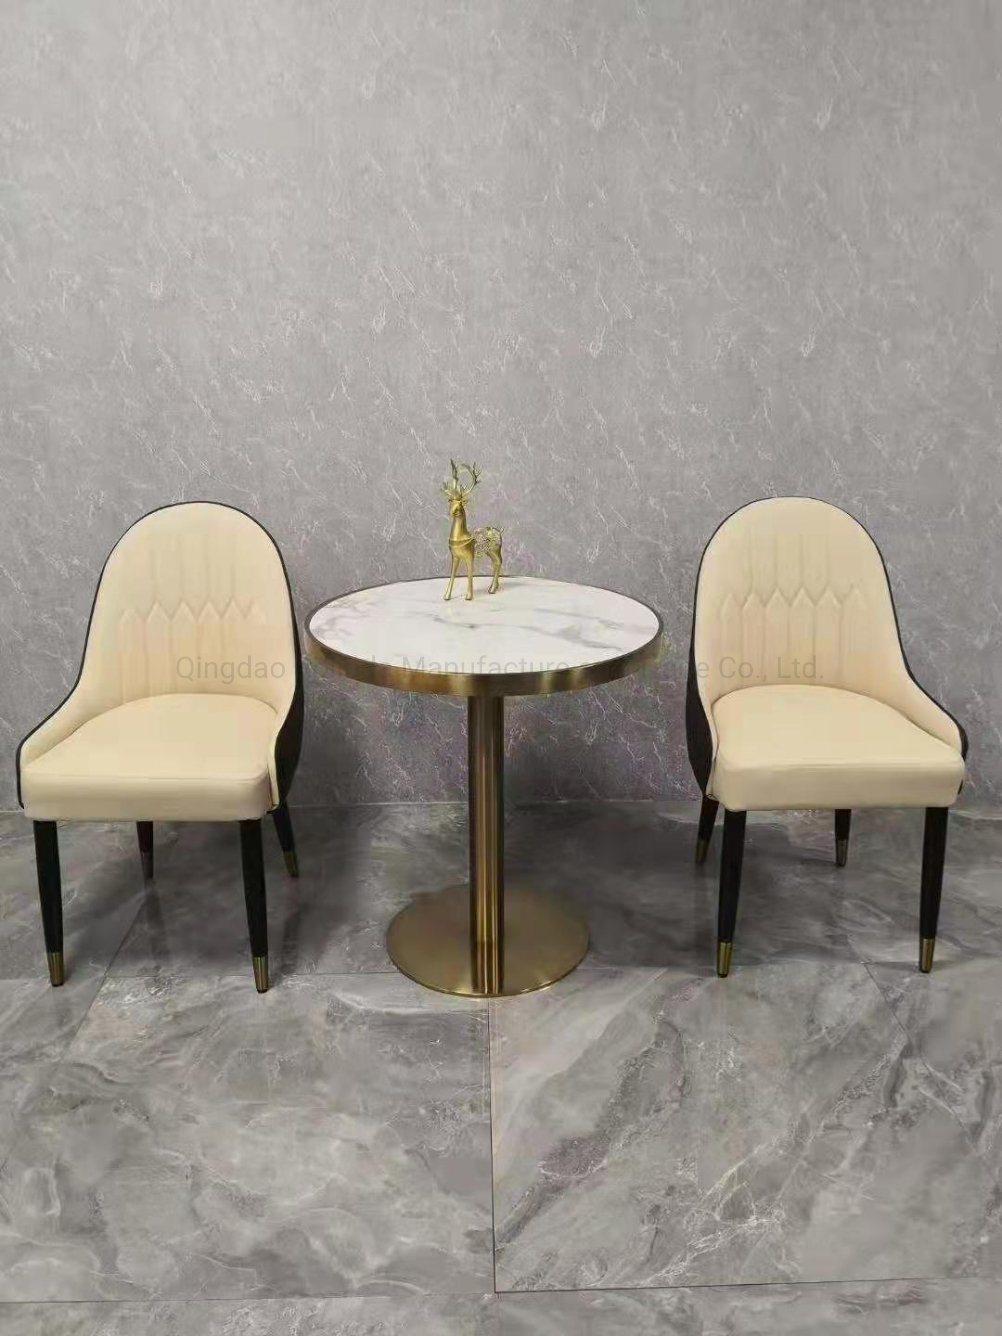 Antique Shell Dining Chairs Armchairs Velvet Upholstered Side Chairs Modern Chairs with Steel Legs and Backrest for Kitchen Dining Room Living Room